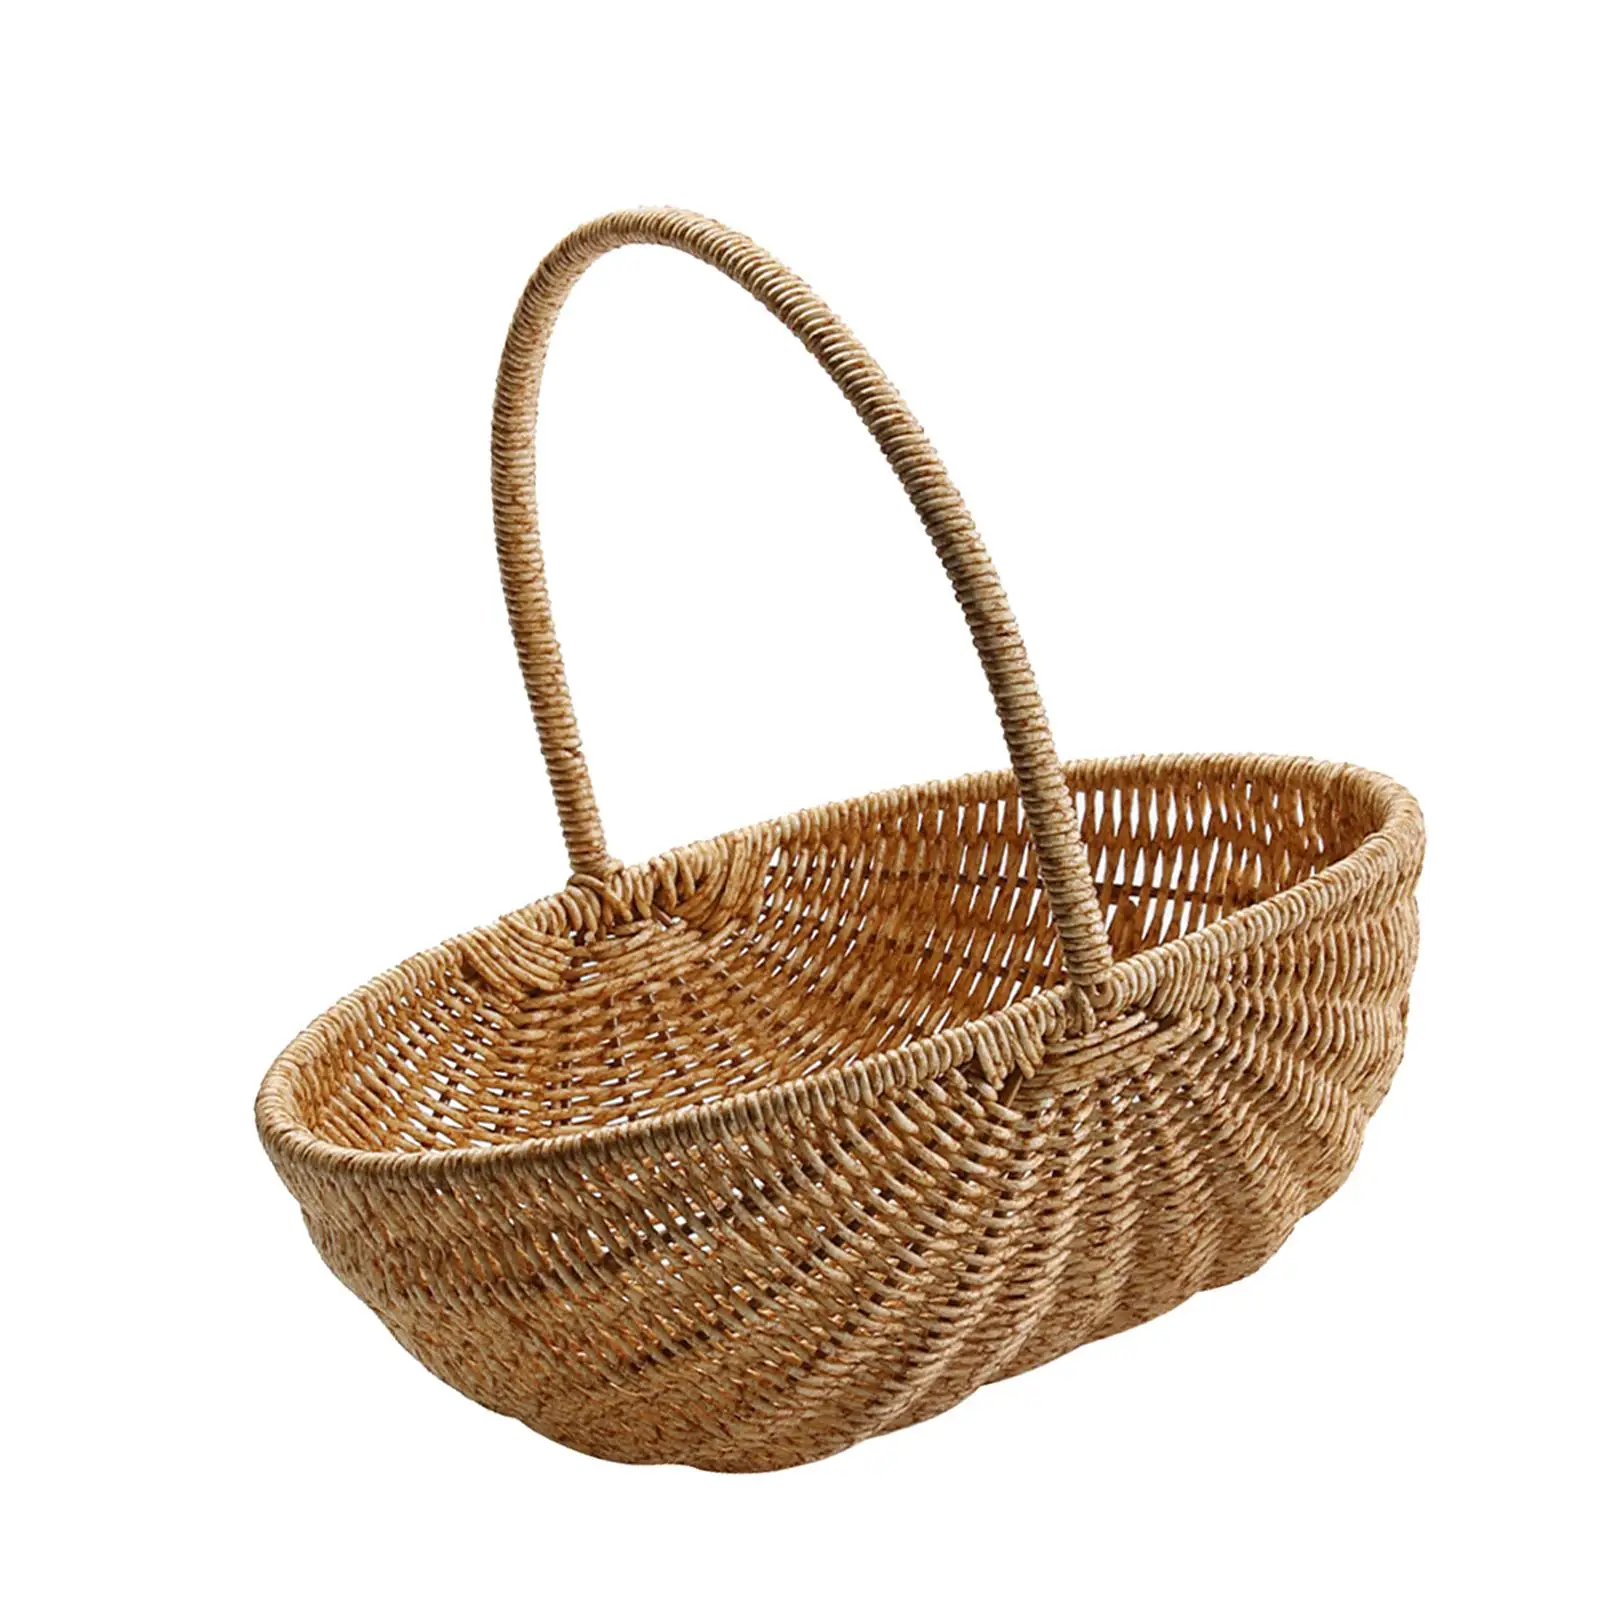 Multipurpose Woven Basket with Handle Rattan Decoration Storage Large Woven Organizer for Picnic Closet Bedroom Pantry Bathroom